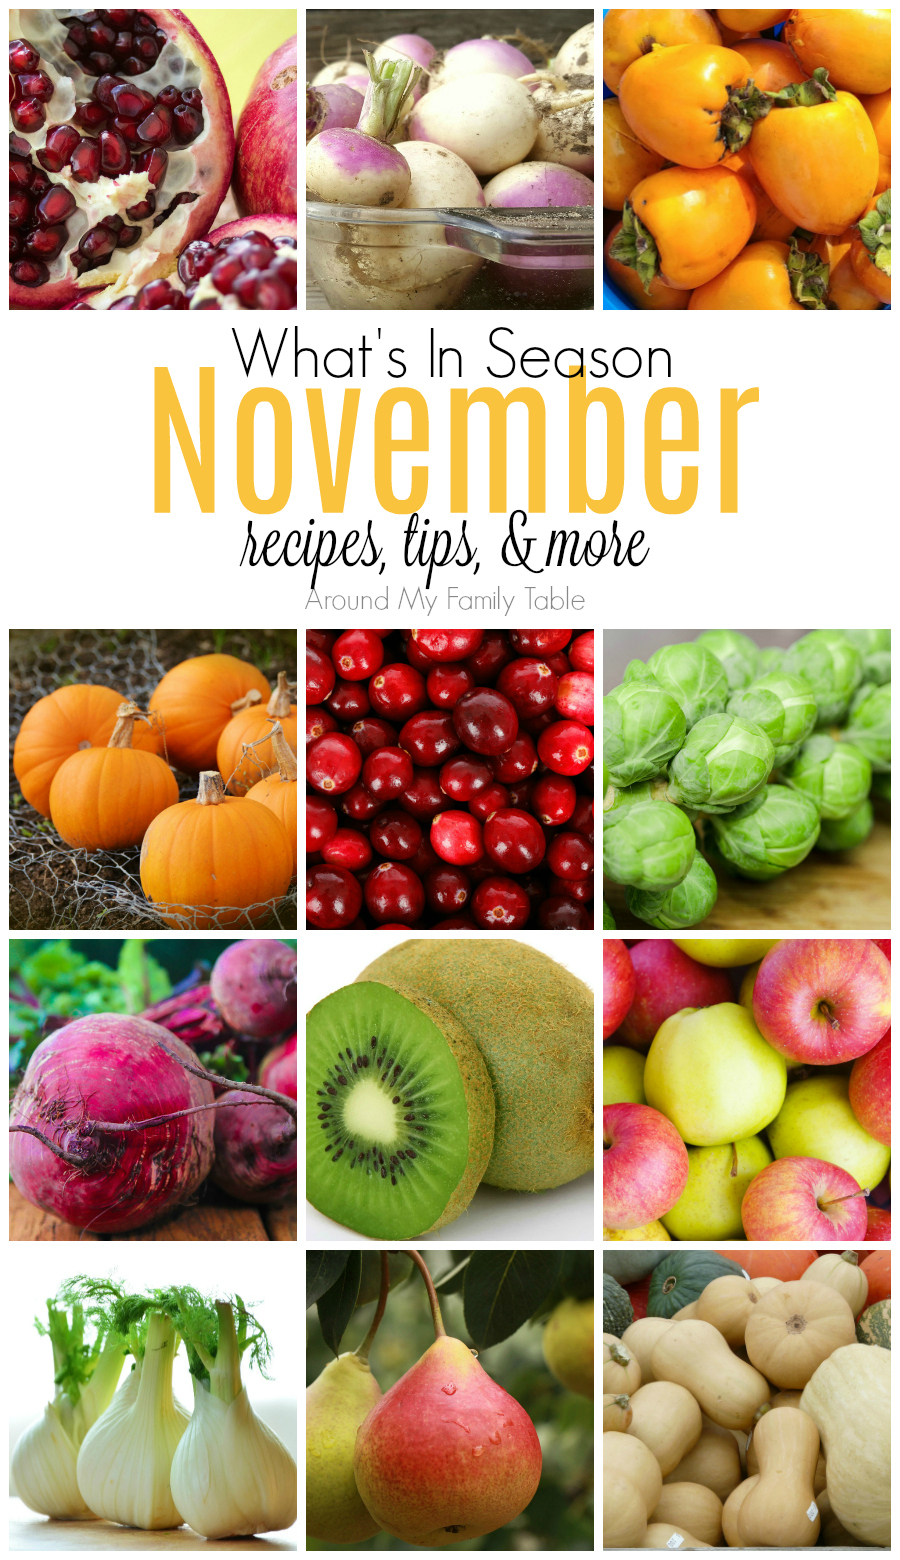 Bring on turkey & pie! This November Seasonal Produce guide has recipes, tips, and more for everything in season this month. #seasonalproduce #eatseasonally